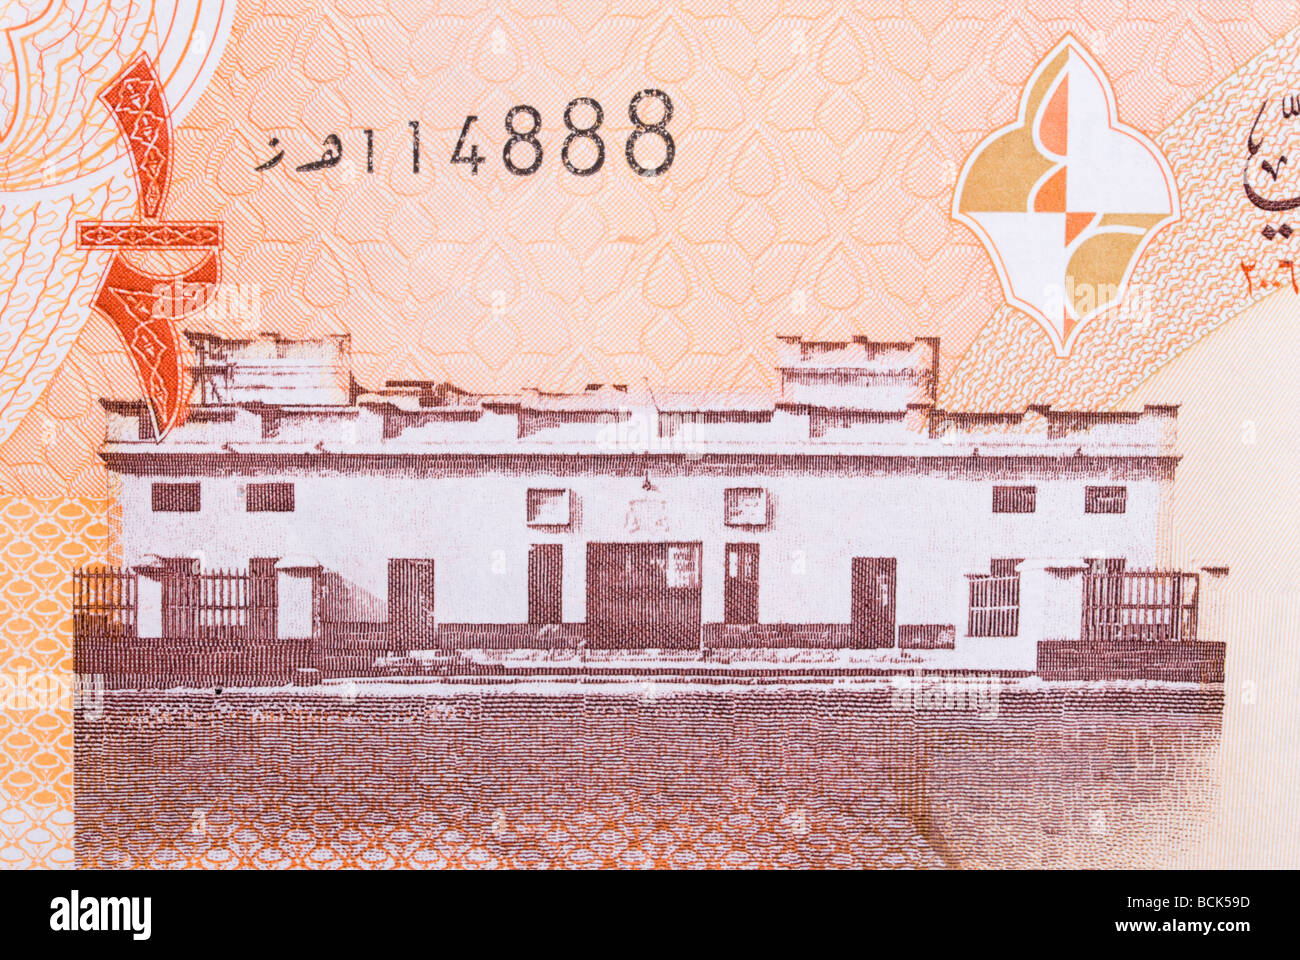 Kingdom of Bahrain Dinar currency banknotes Stock Photo